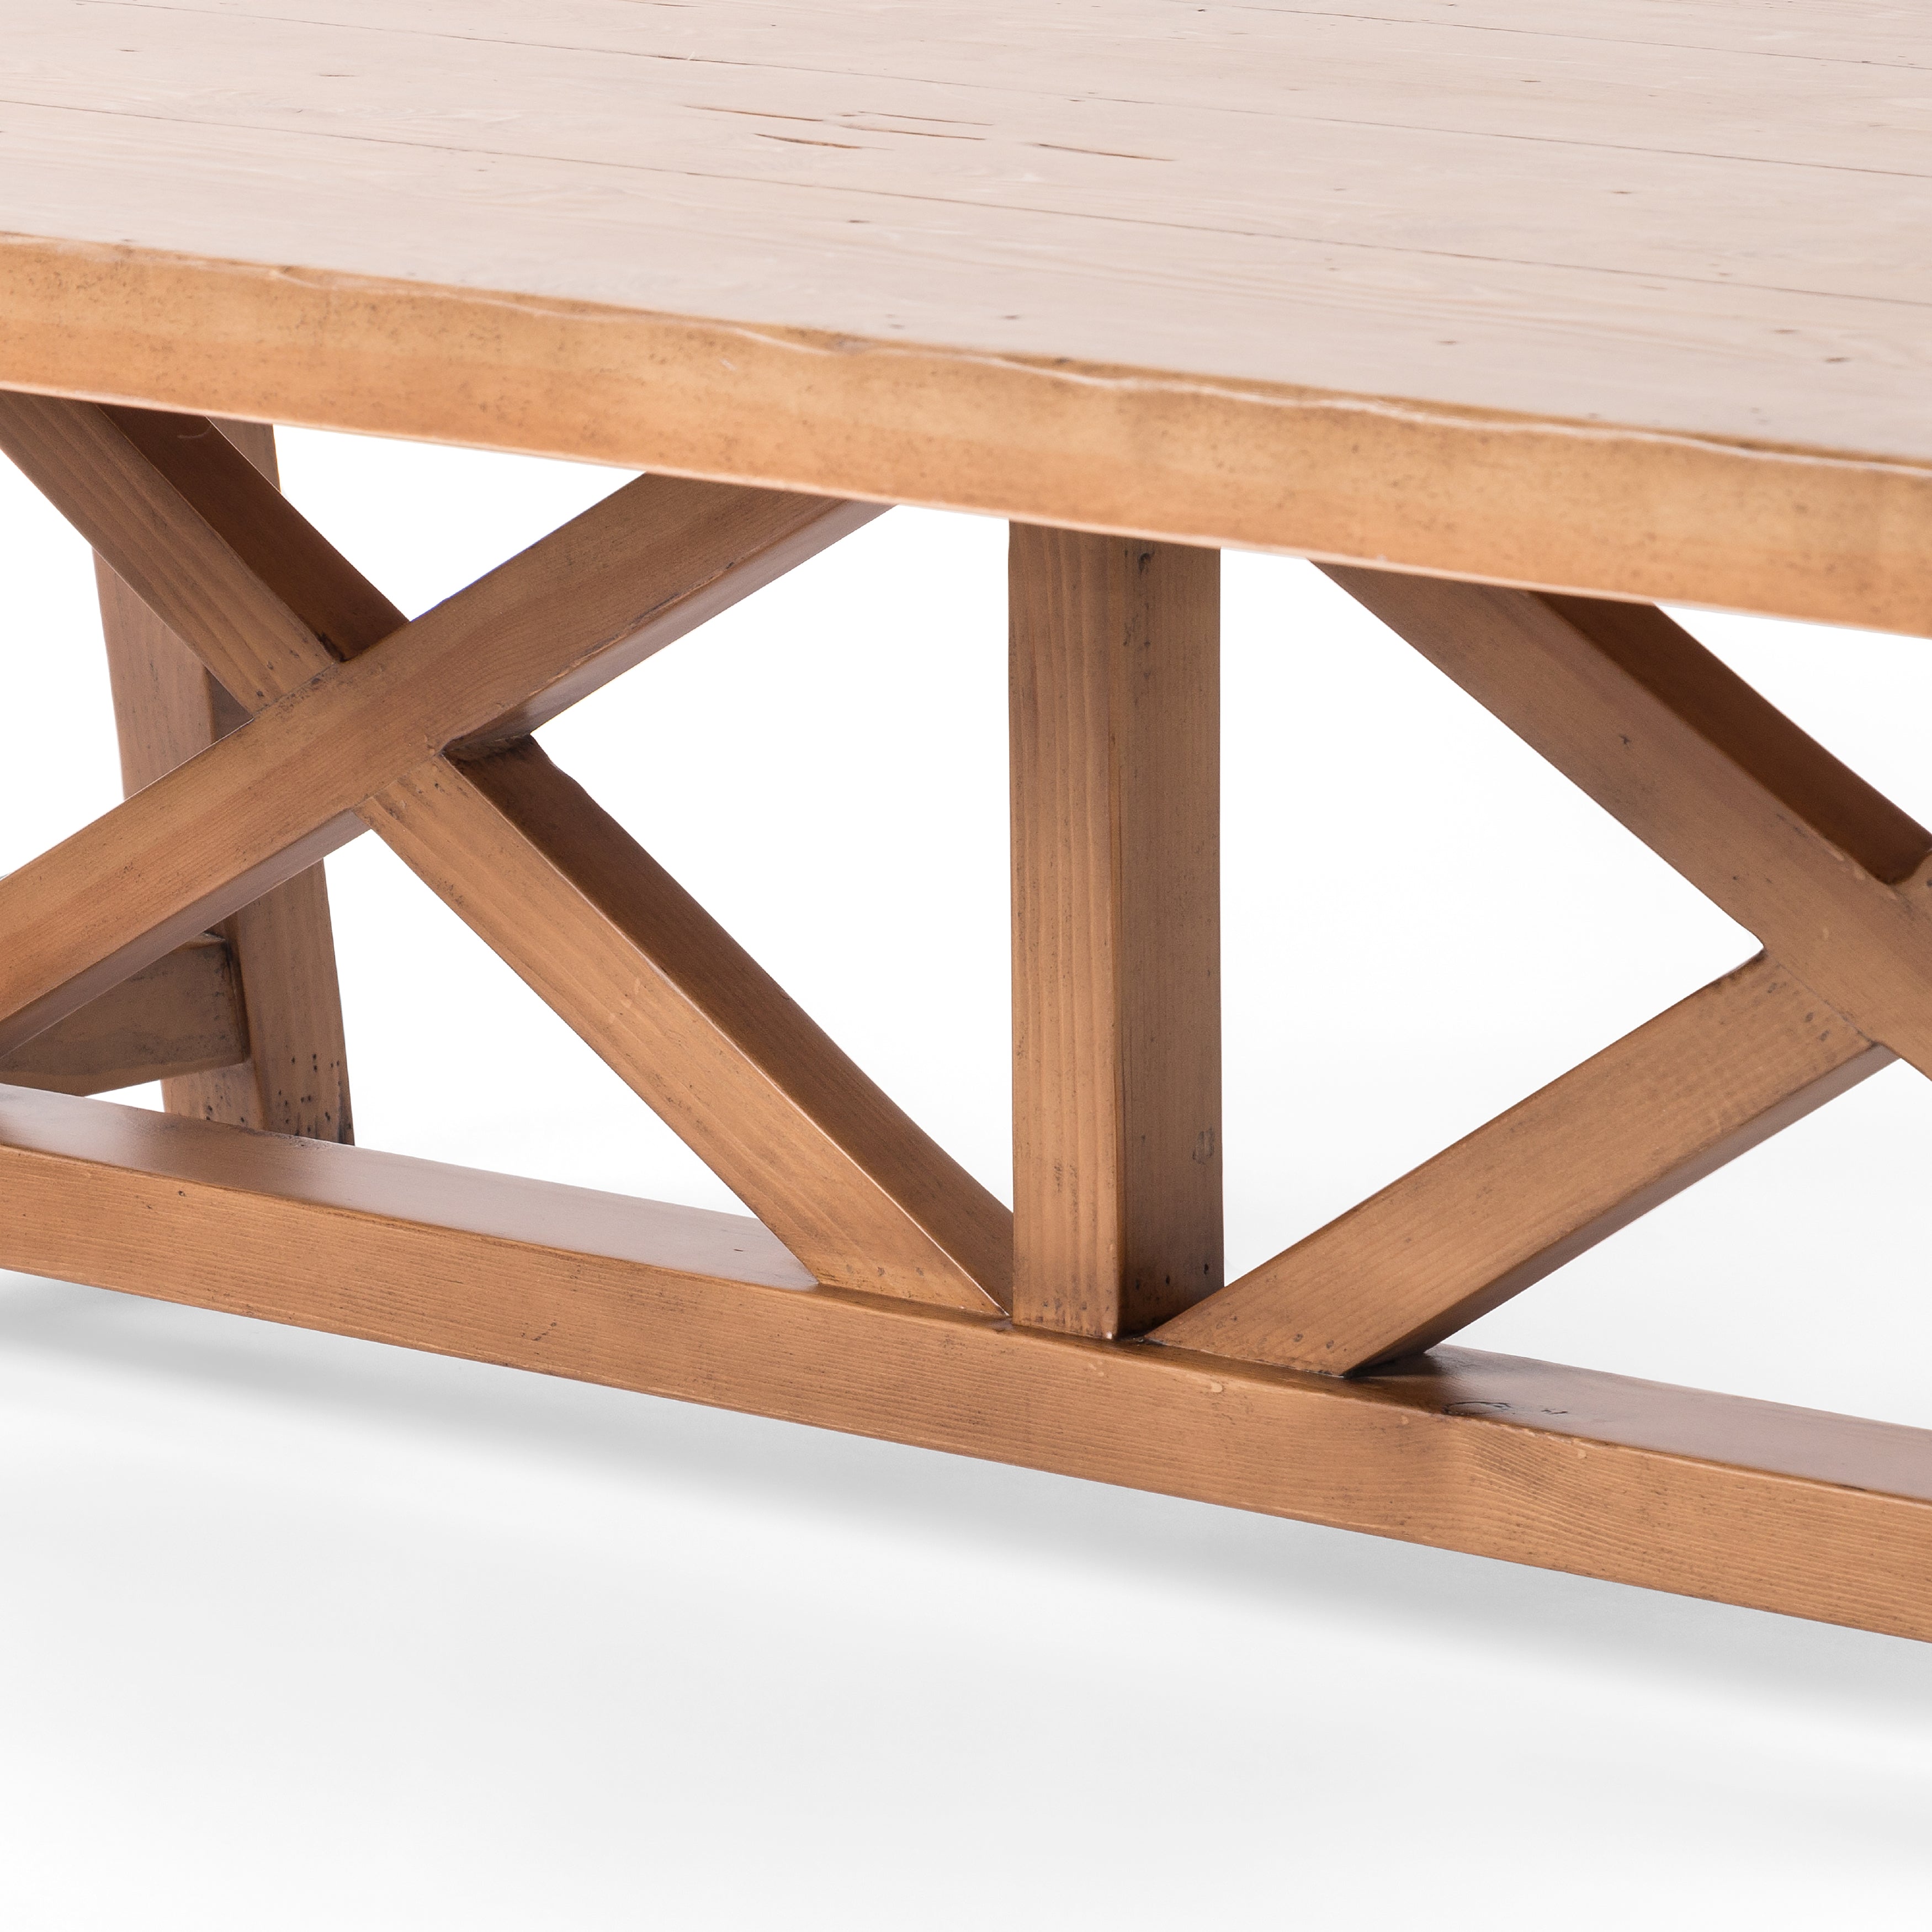 Inspired by European farmhouse design, Trellis Waxed Pine Coffee Table forms an X-shape base for a traditional, trellis-style look. Amethyst Home provides interior design services, furniture, rugs, and lighting in the Miami metro area. 